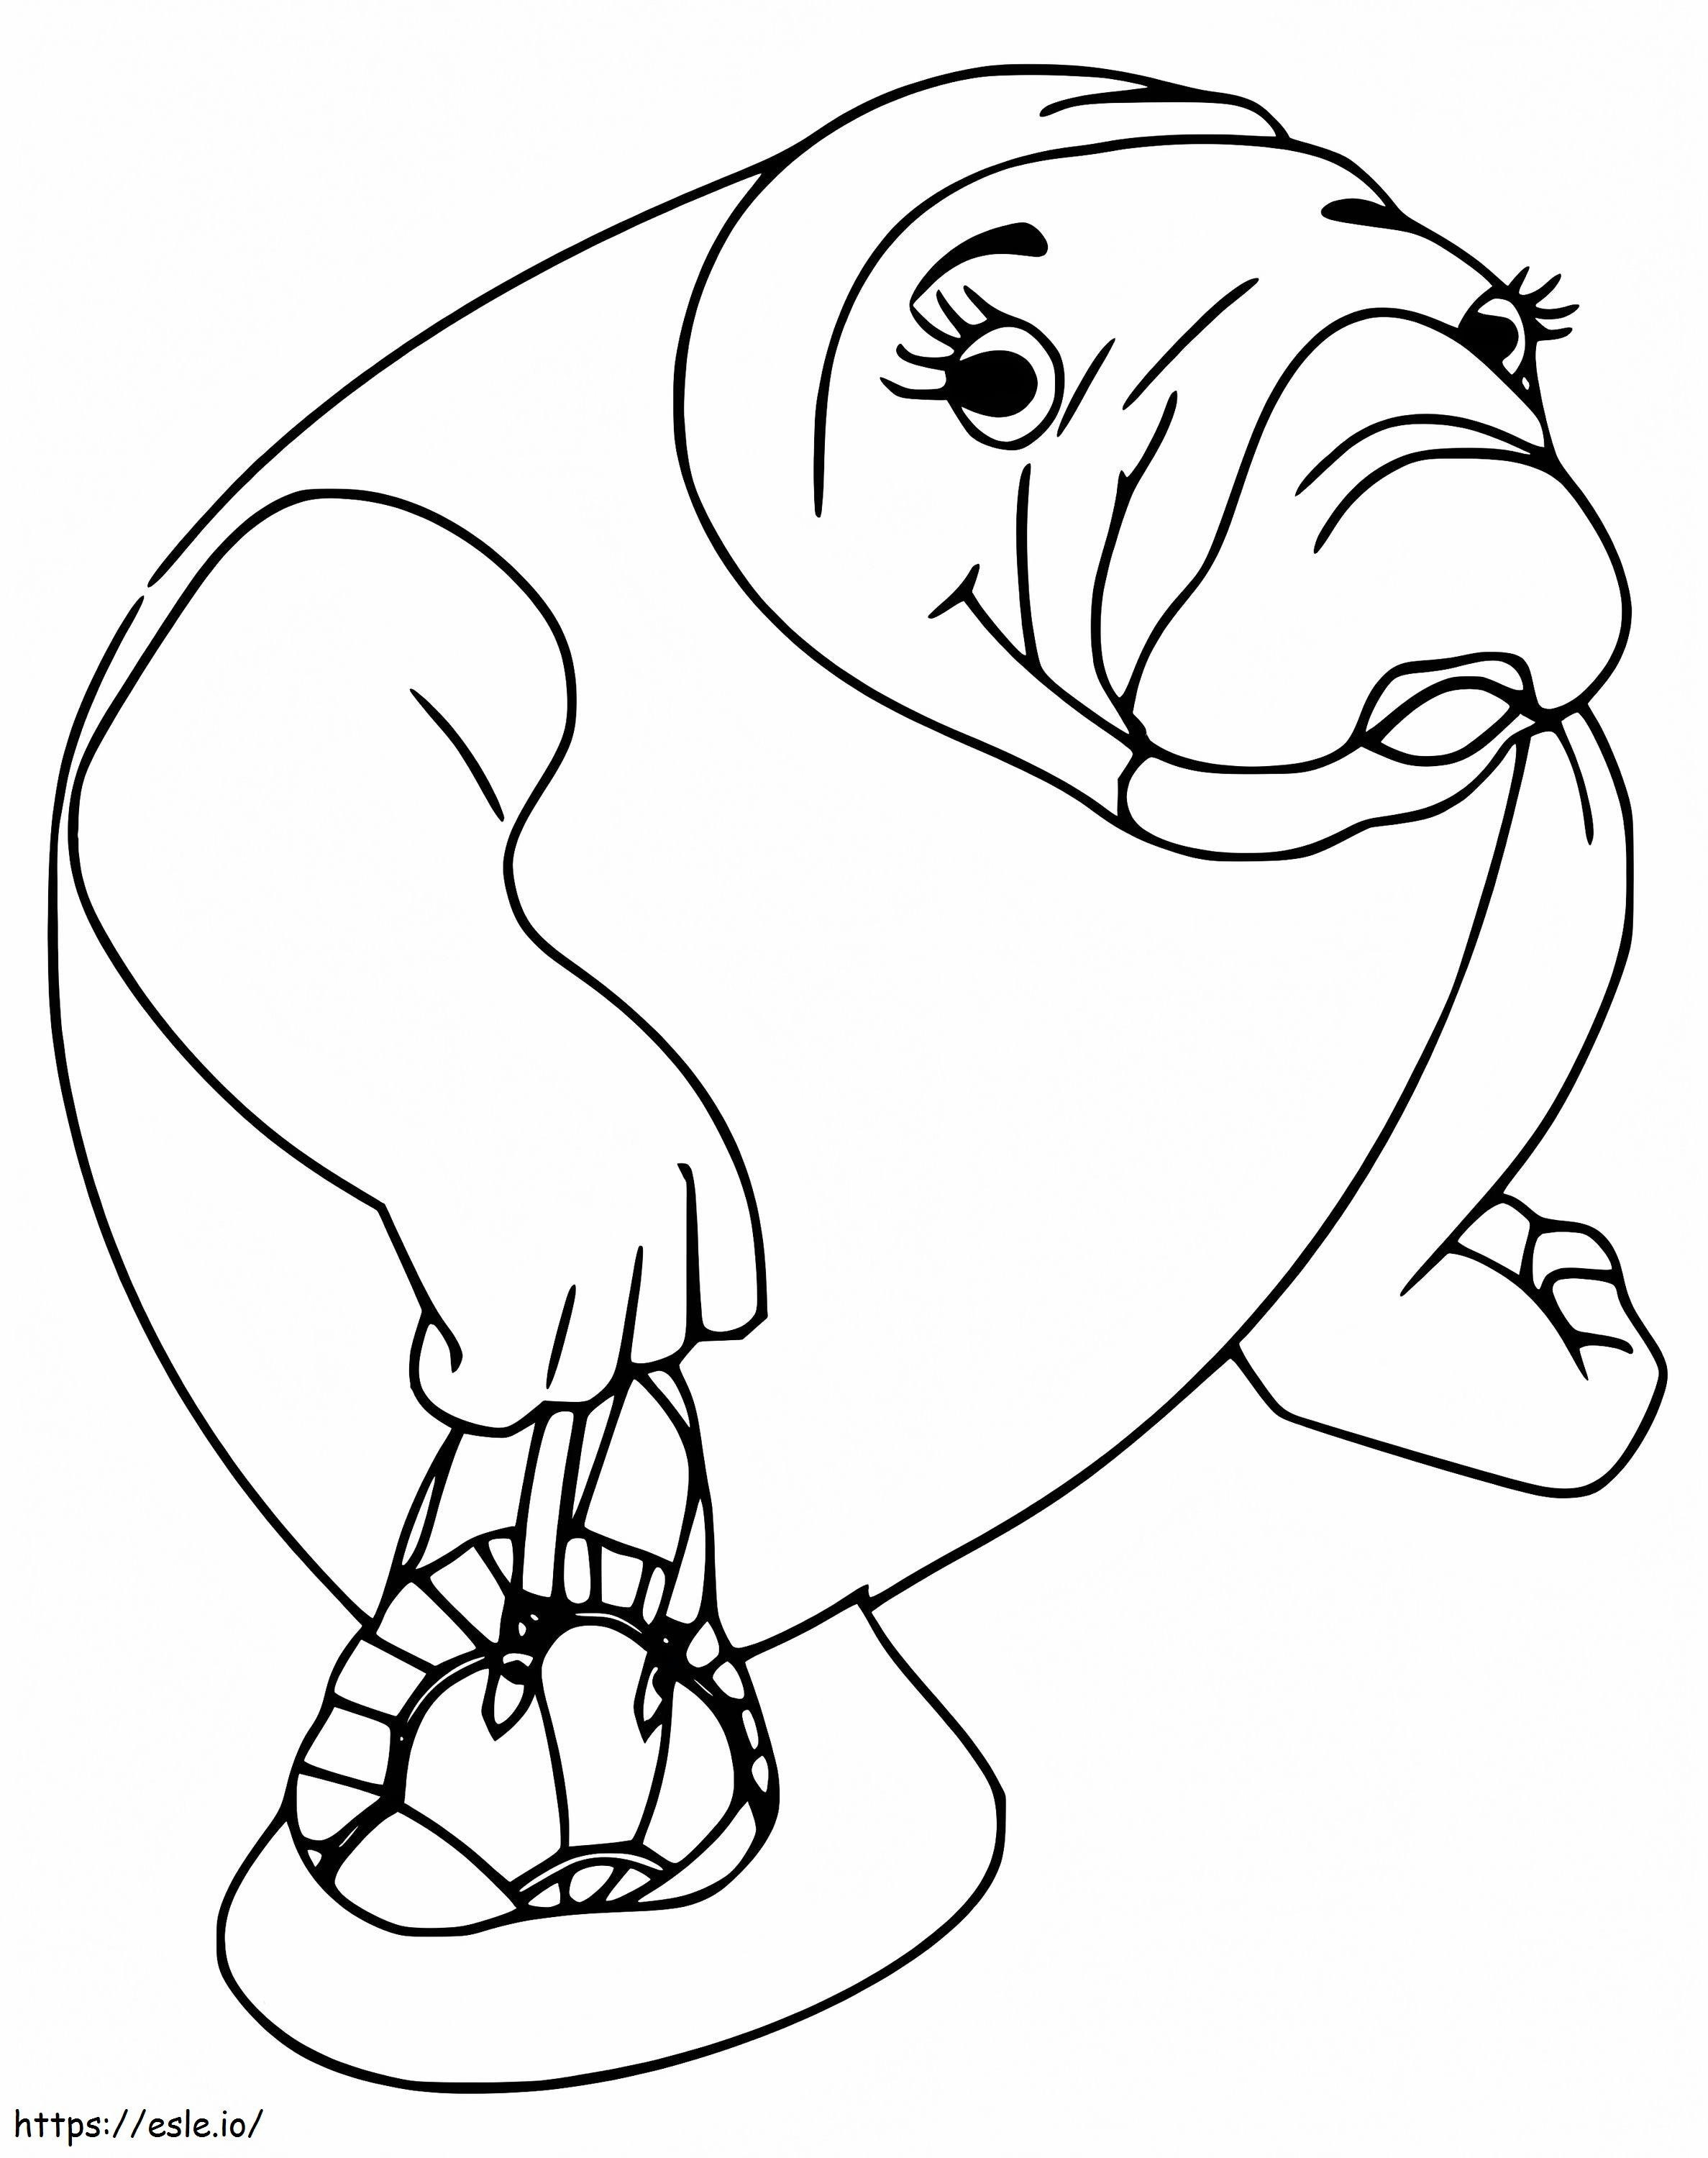 Manatee Smiling coloring page